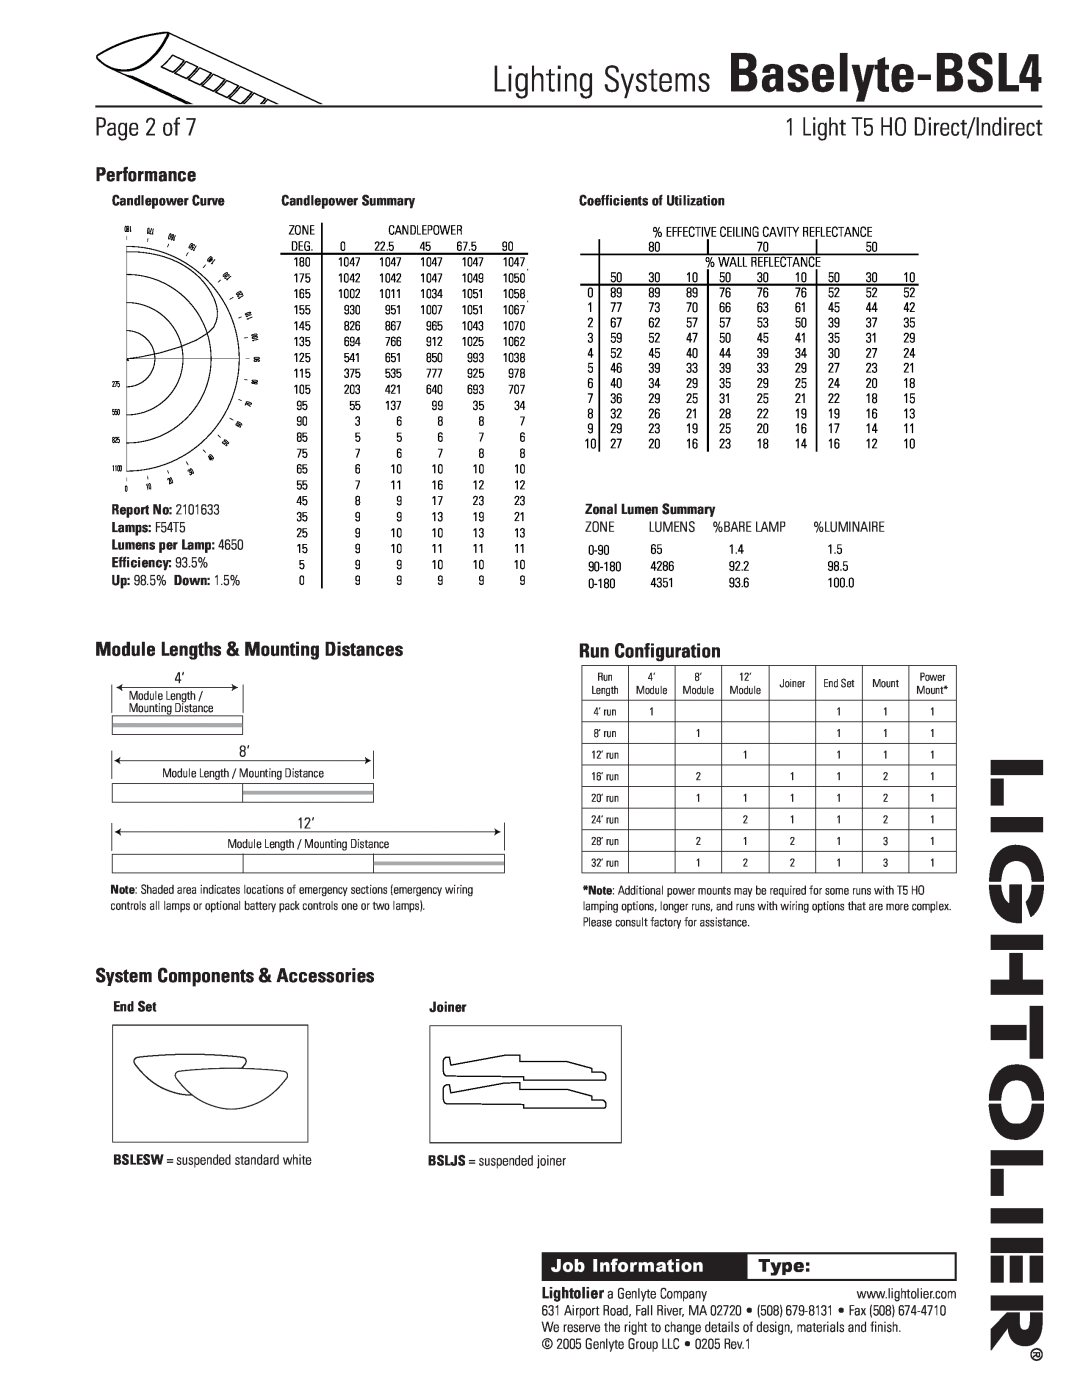 Lightolier Lighting Systems Baselyte-BSL4, Page of, Light T5 HO Direct/Indirect, Performance, Run Configuration, Type 